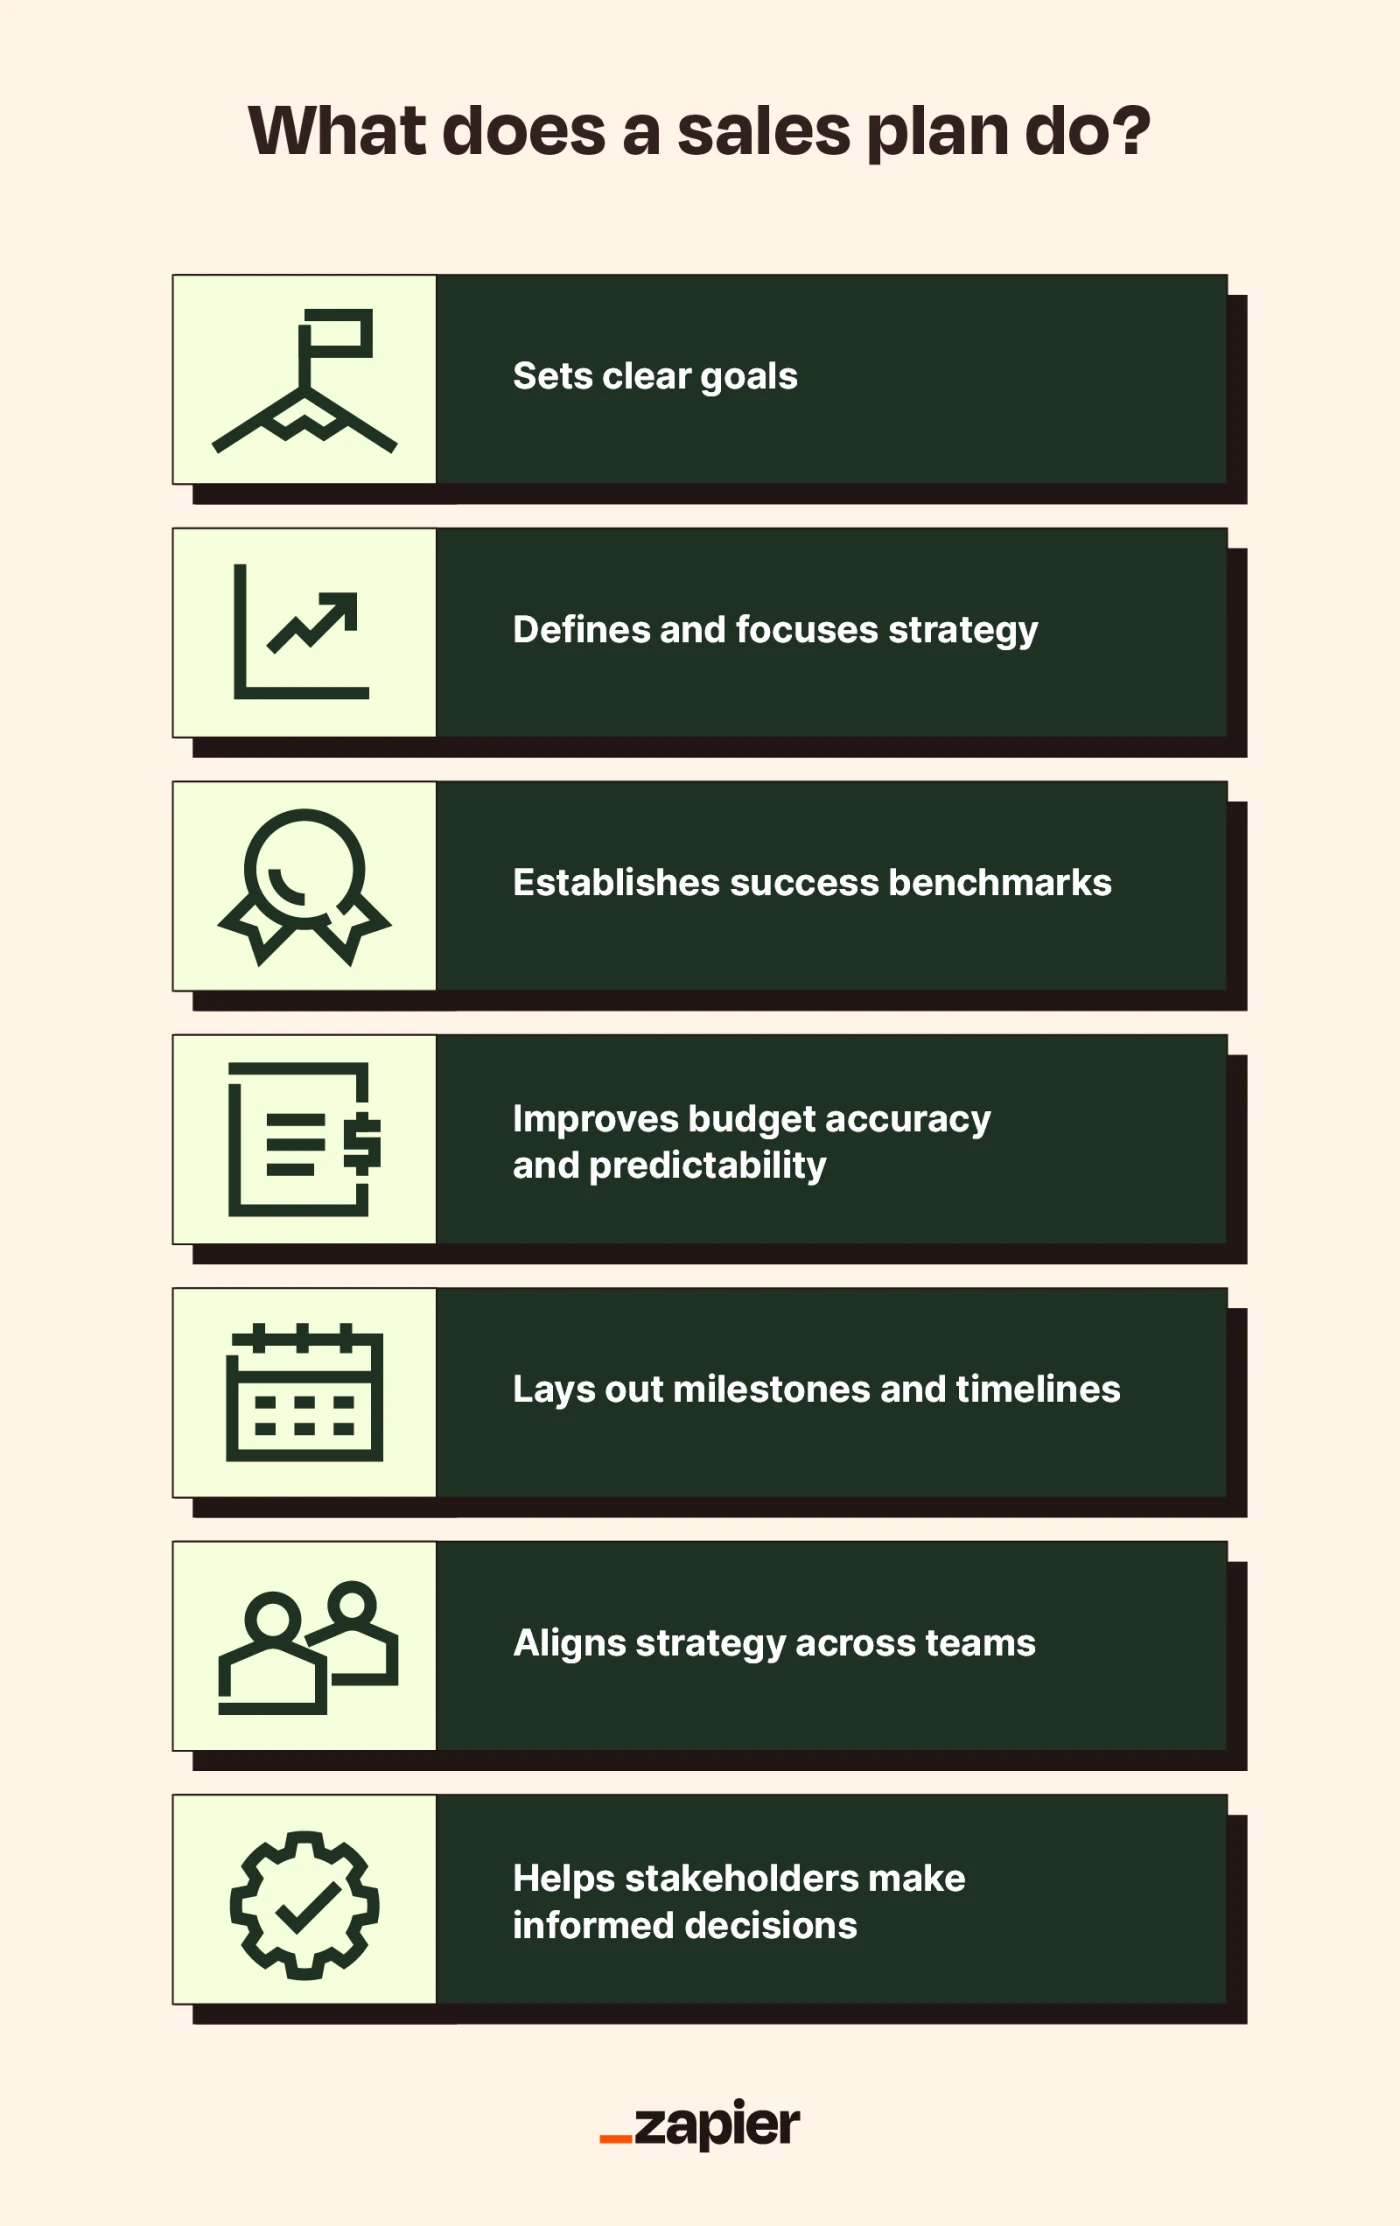 Illustrated list of what a sales plan does, with each item in a dark green box on a light peach background